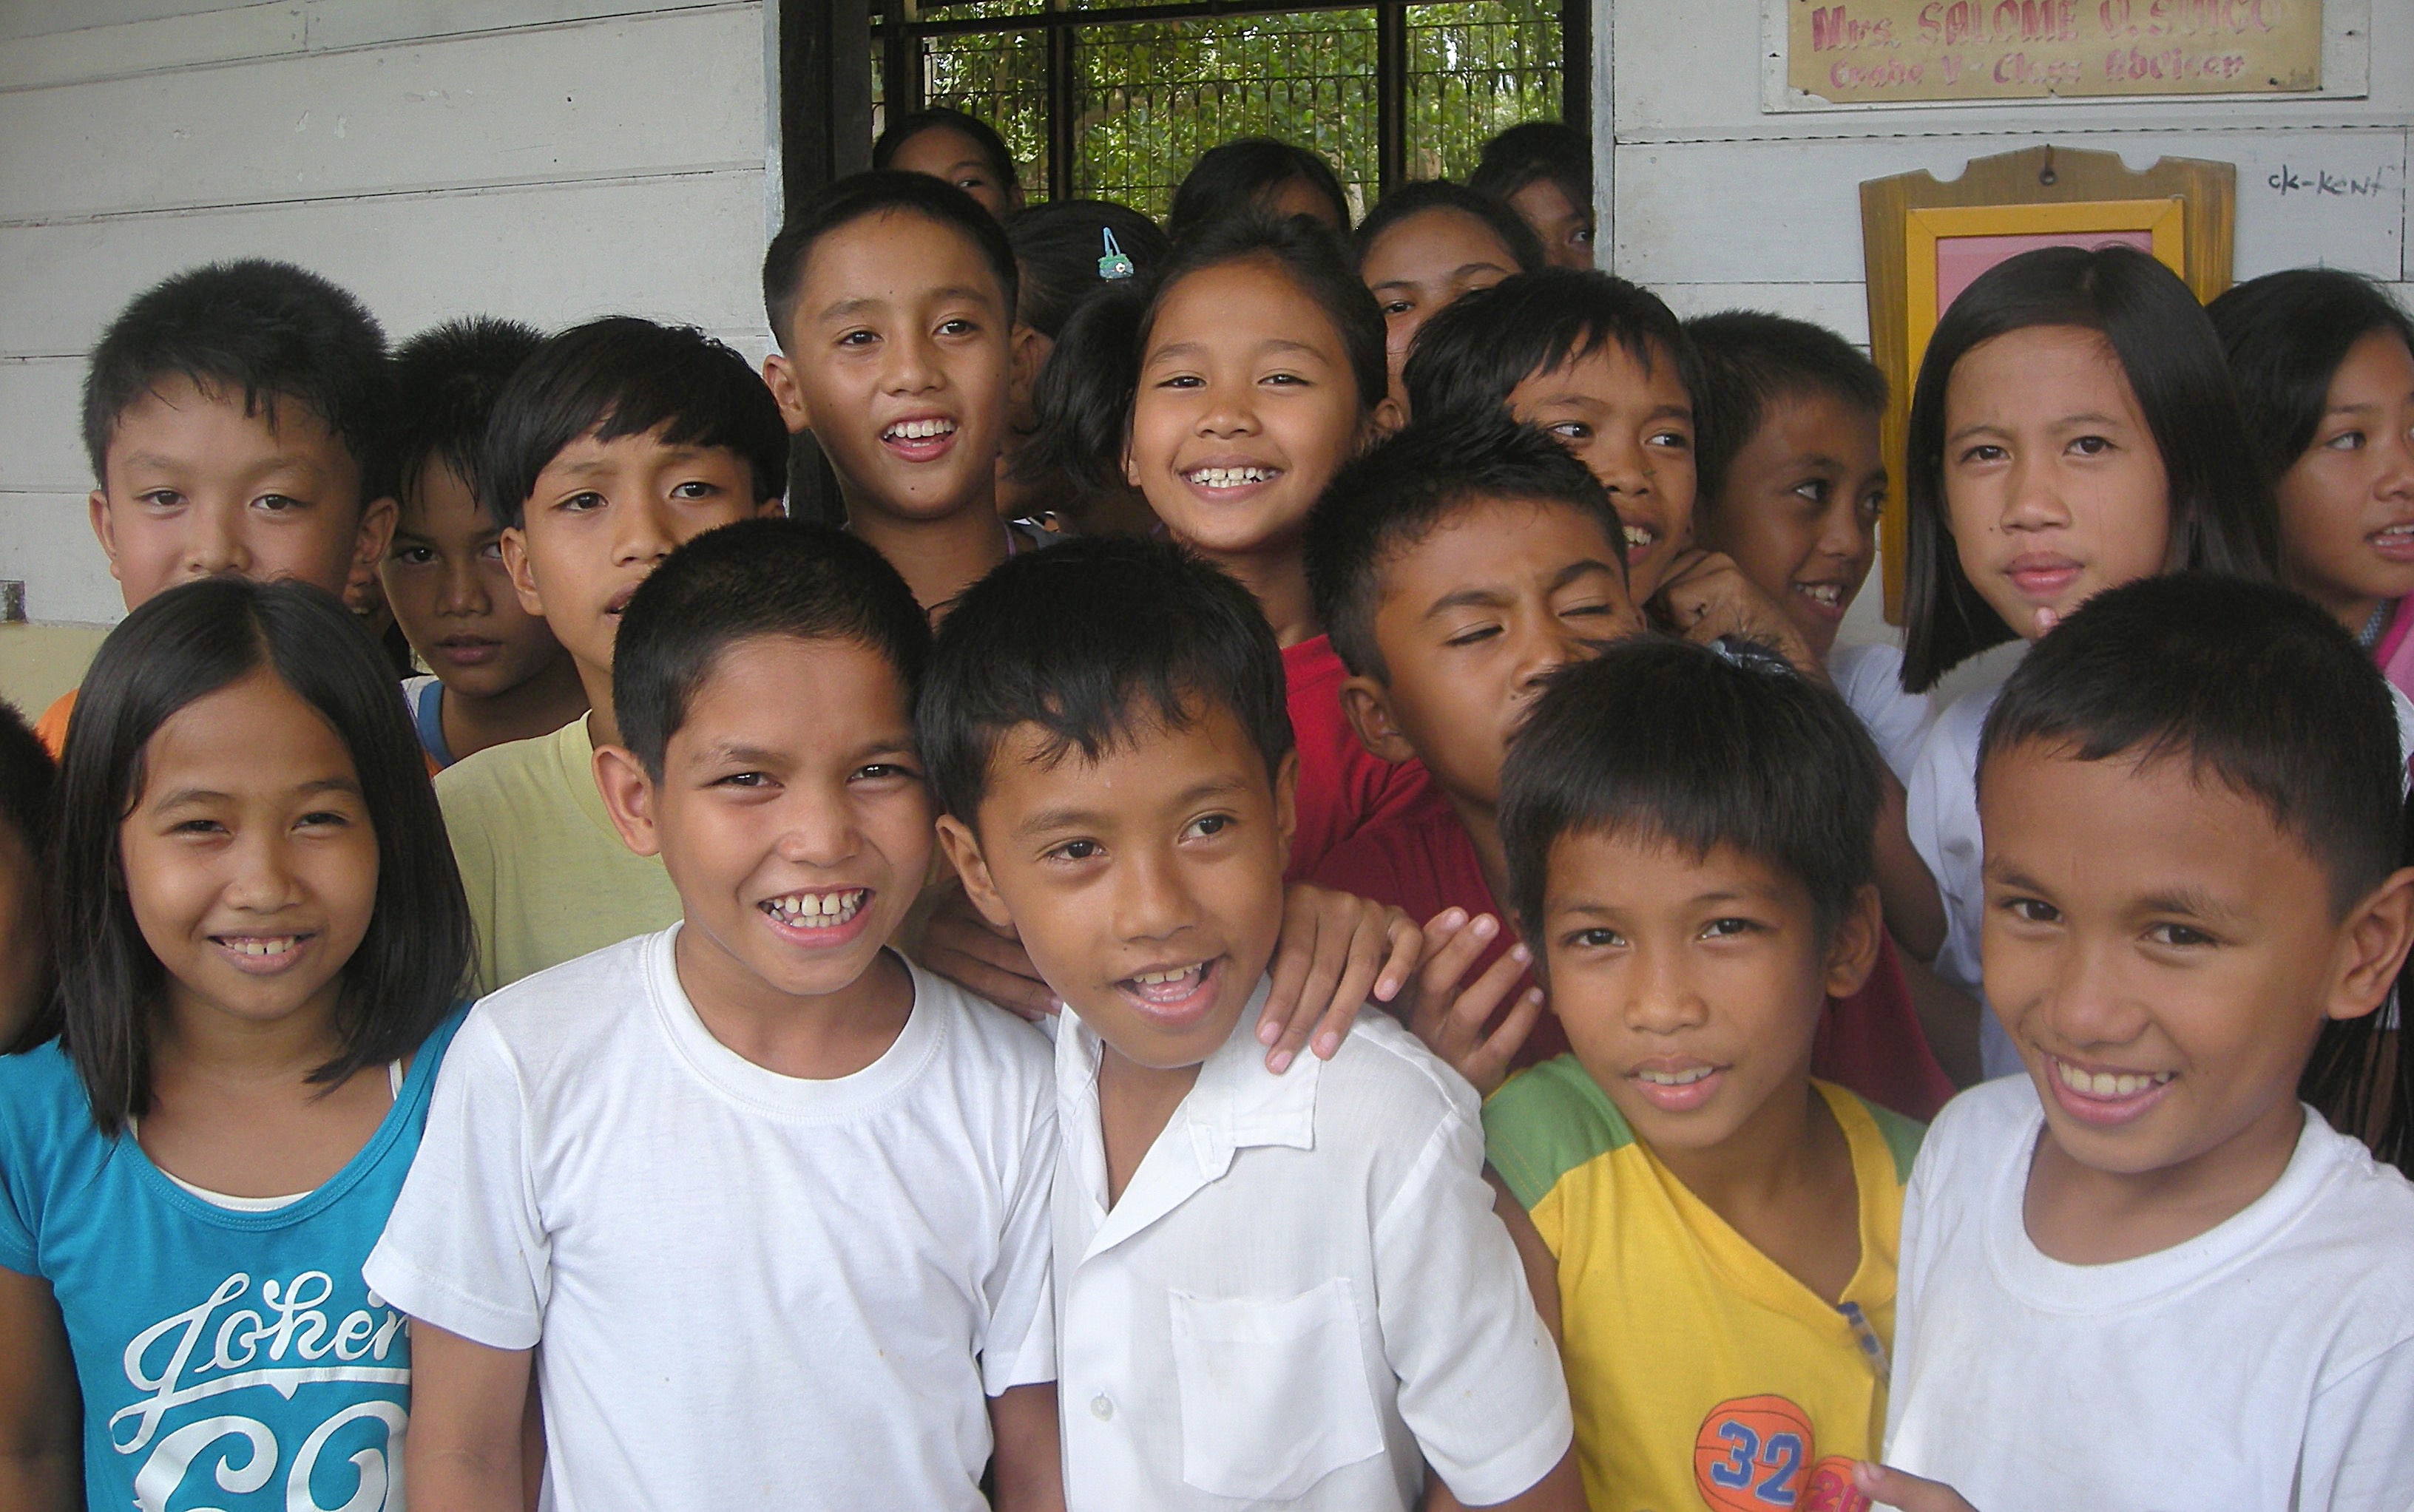 In the Philippines, a school program shows diverging results for male and female students